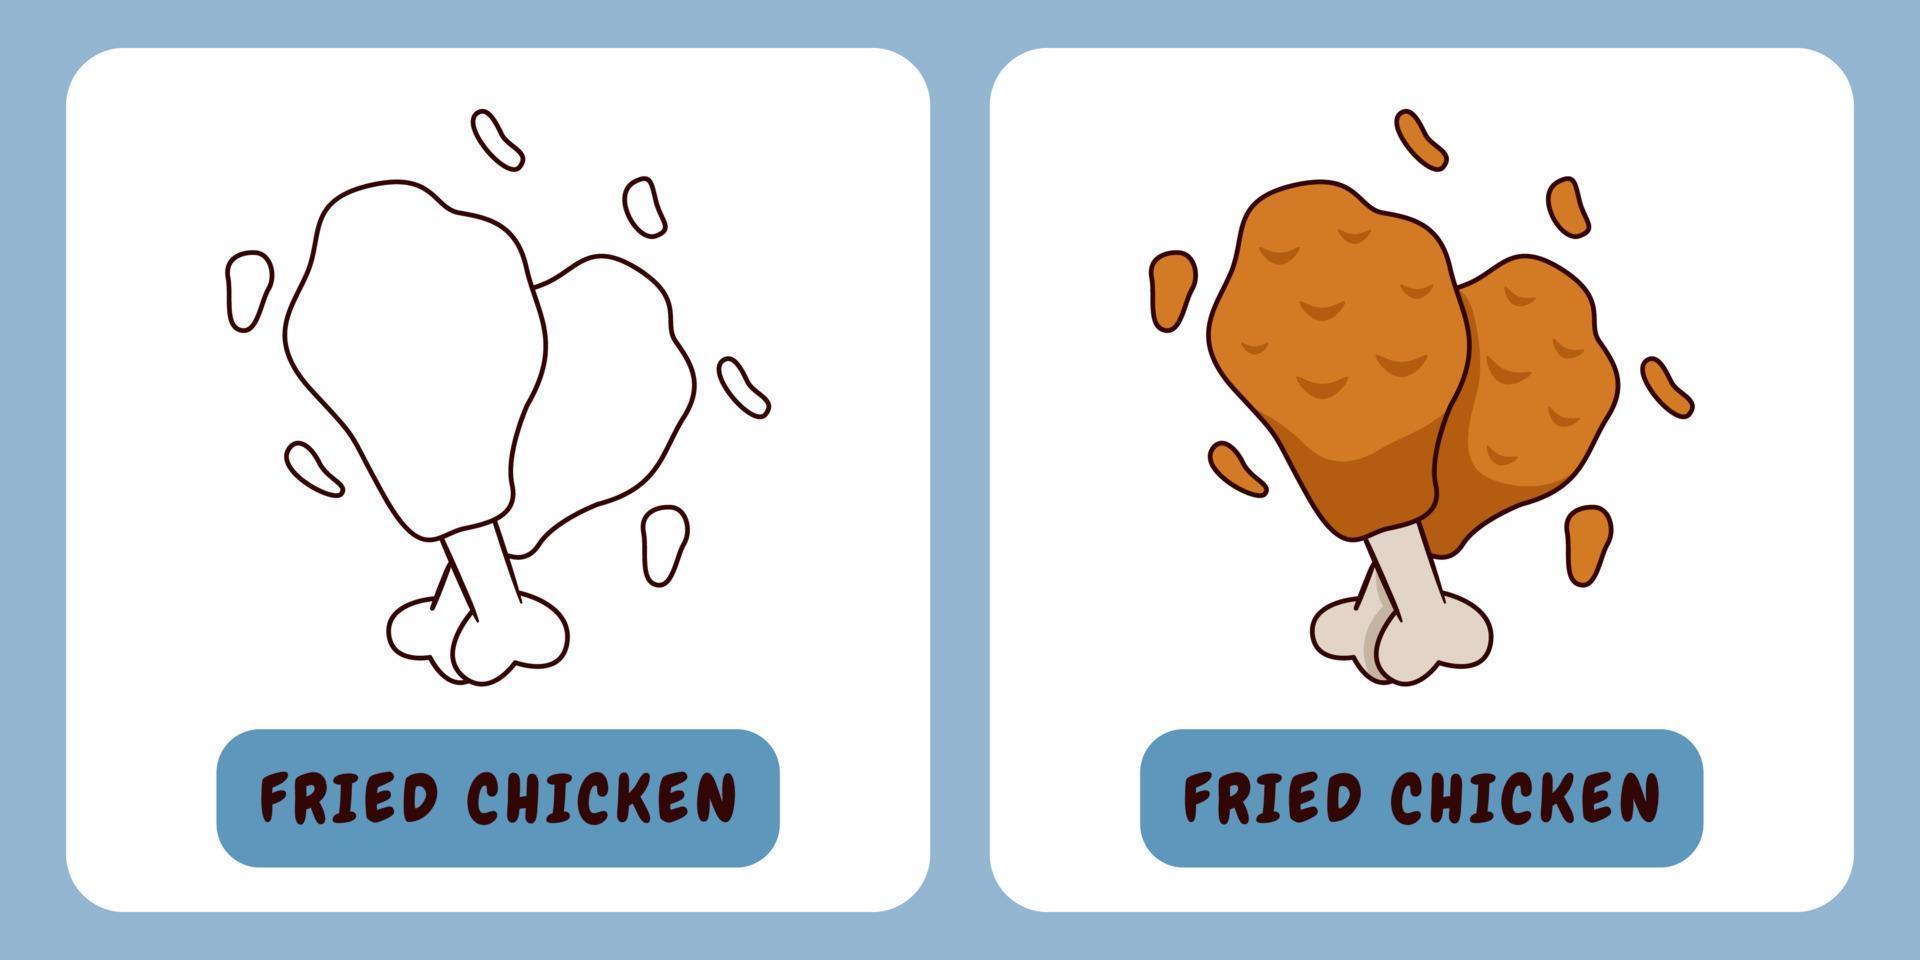 Fried Chicken cartoon illustration for children's coloring book vector